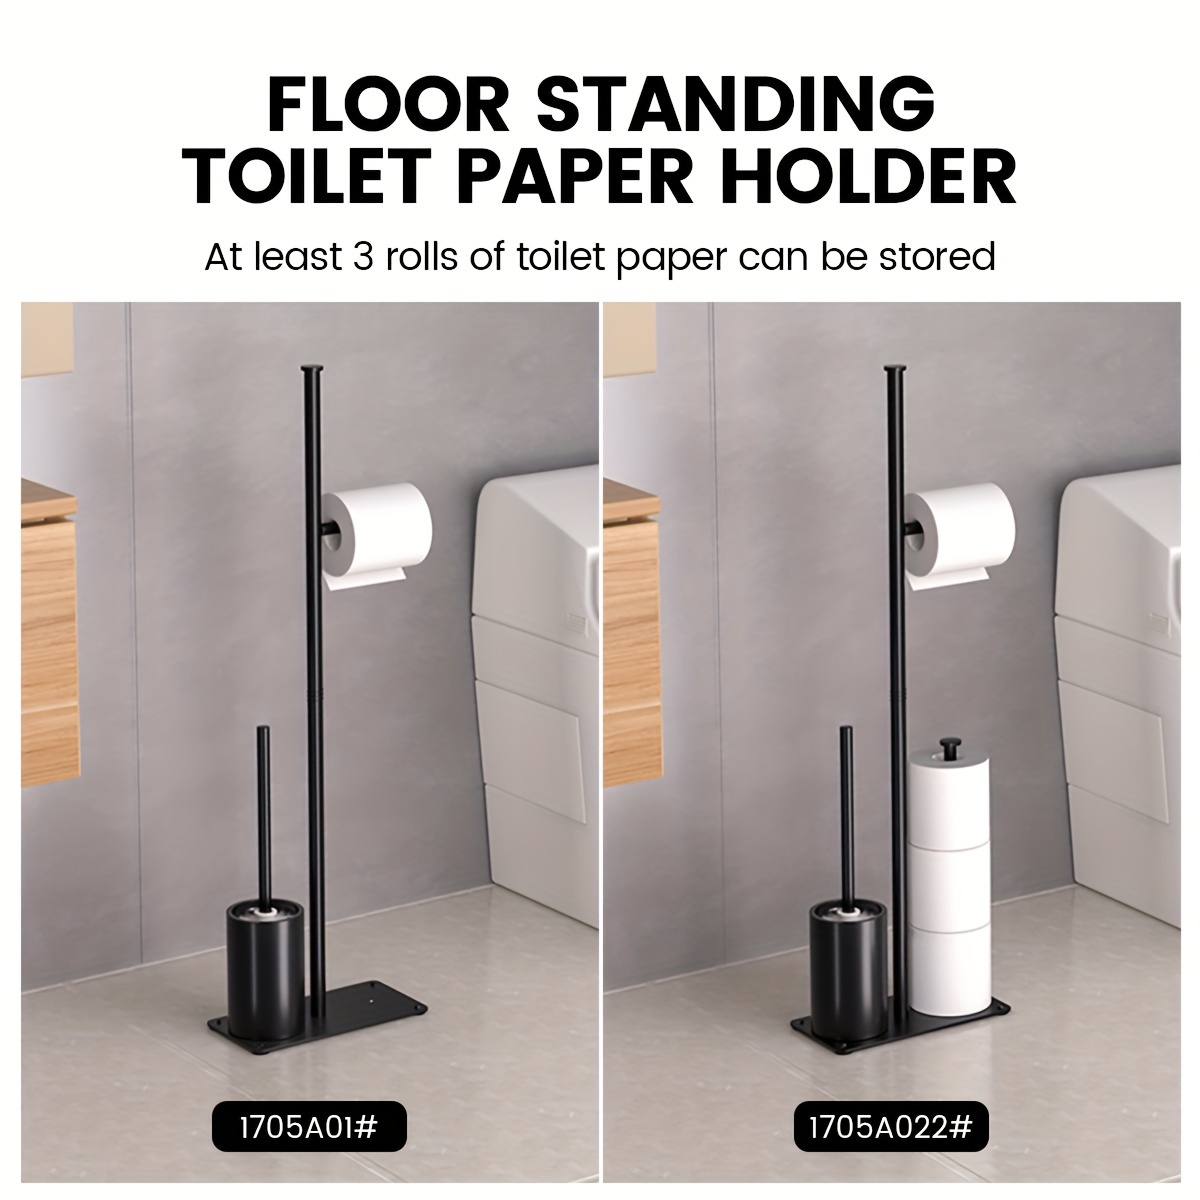 

Space-saving Freestanding Toilet Paper Holder With Built-in Brush - Self-adhesive, Rectangular Bathroom Organizer For Tissues And Accessories Bathroom Organizers And Storage Toilet Brush